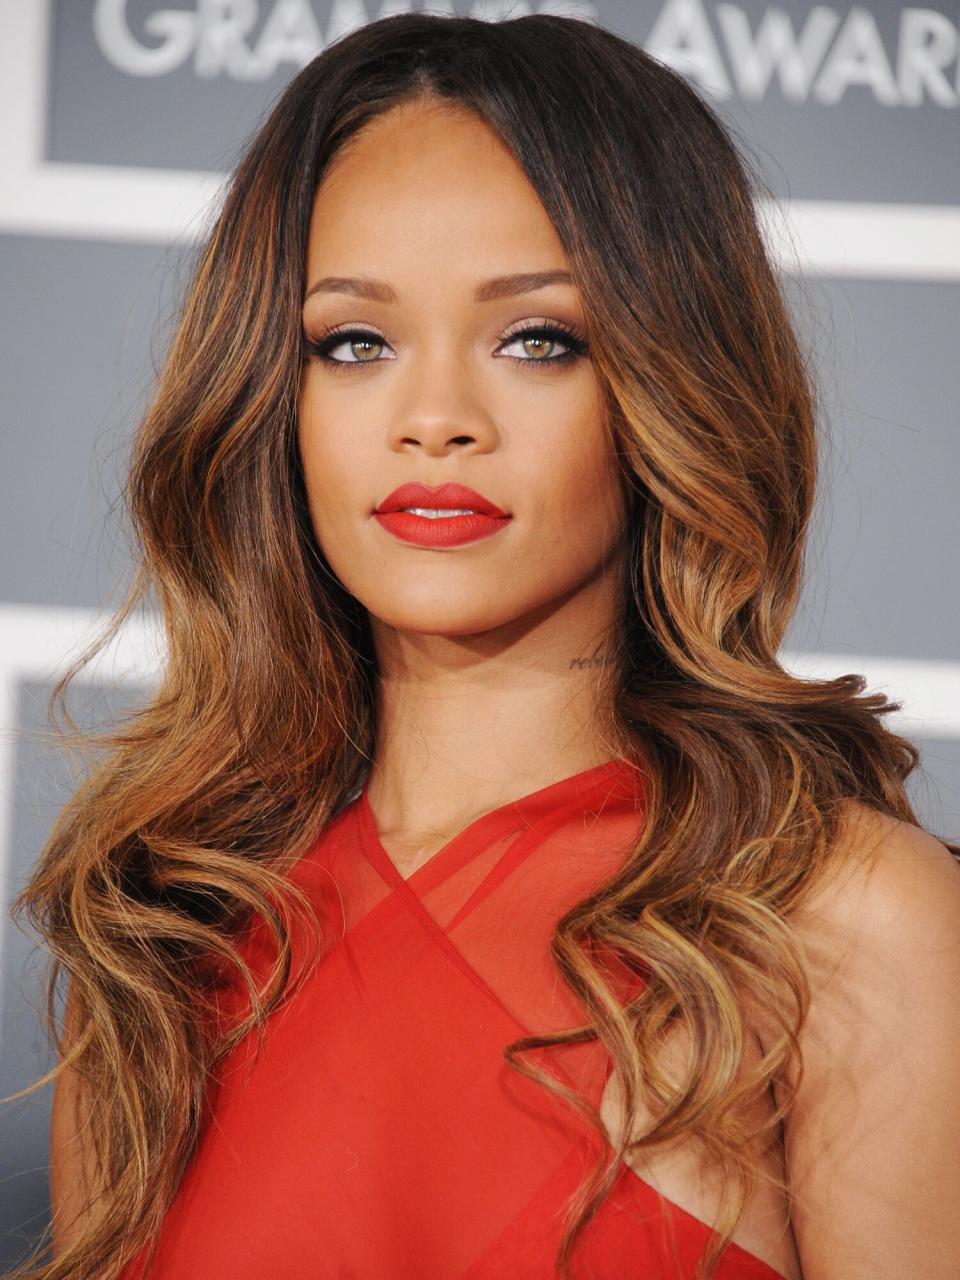 Rihanna attends the 55th Annual GRAMMY Awards at STAPLES Center on February 10, 2013 in Los Angeles, California